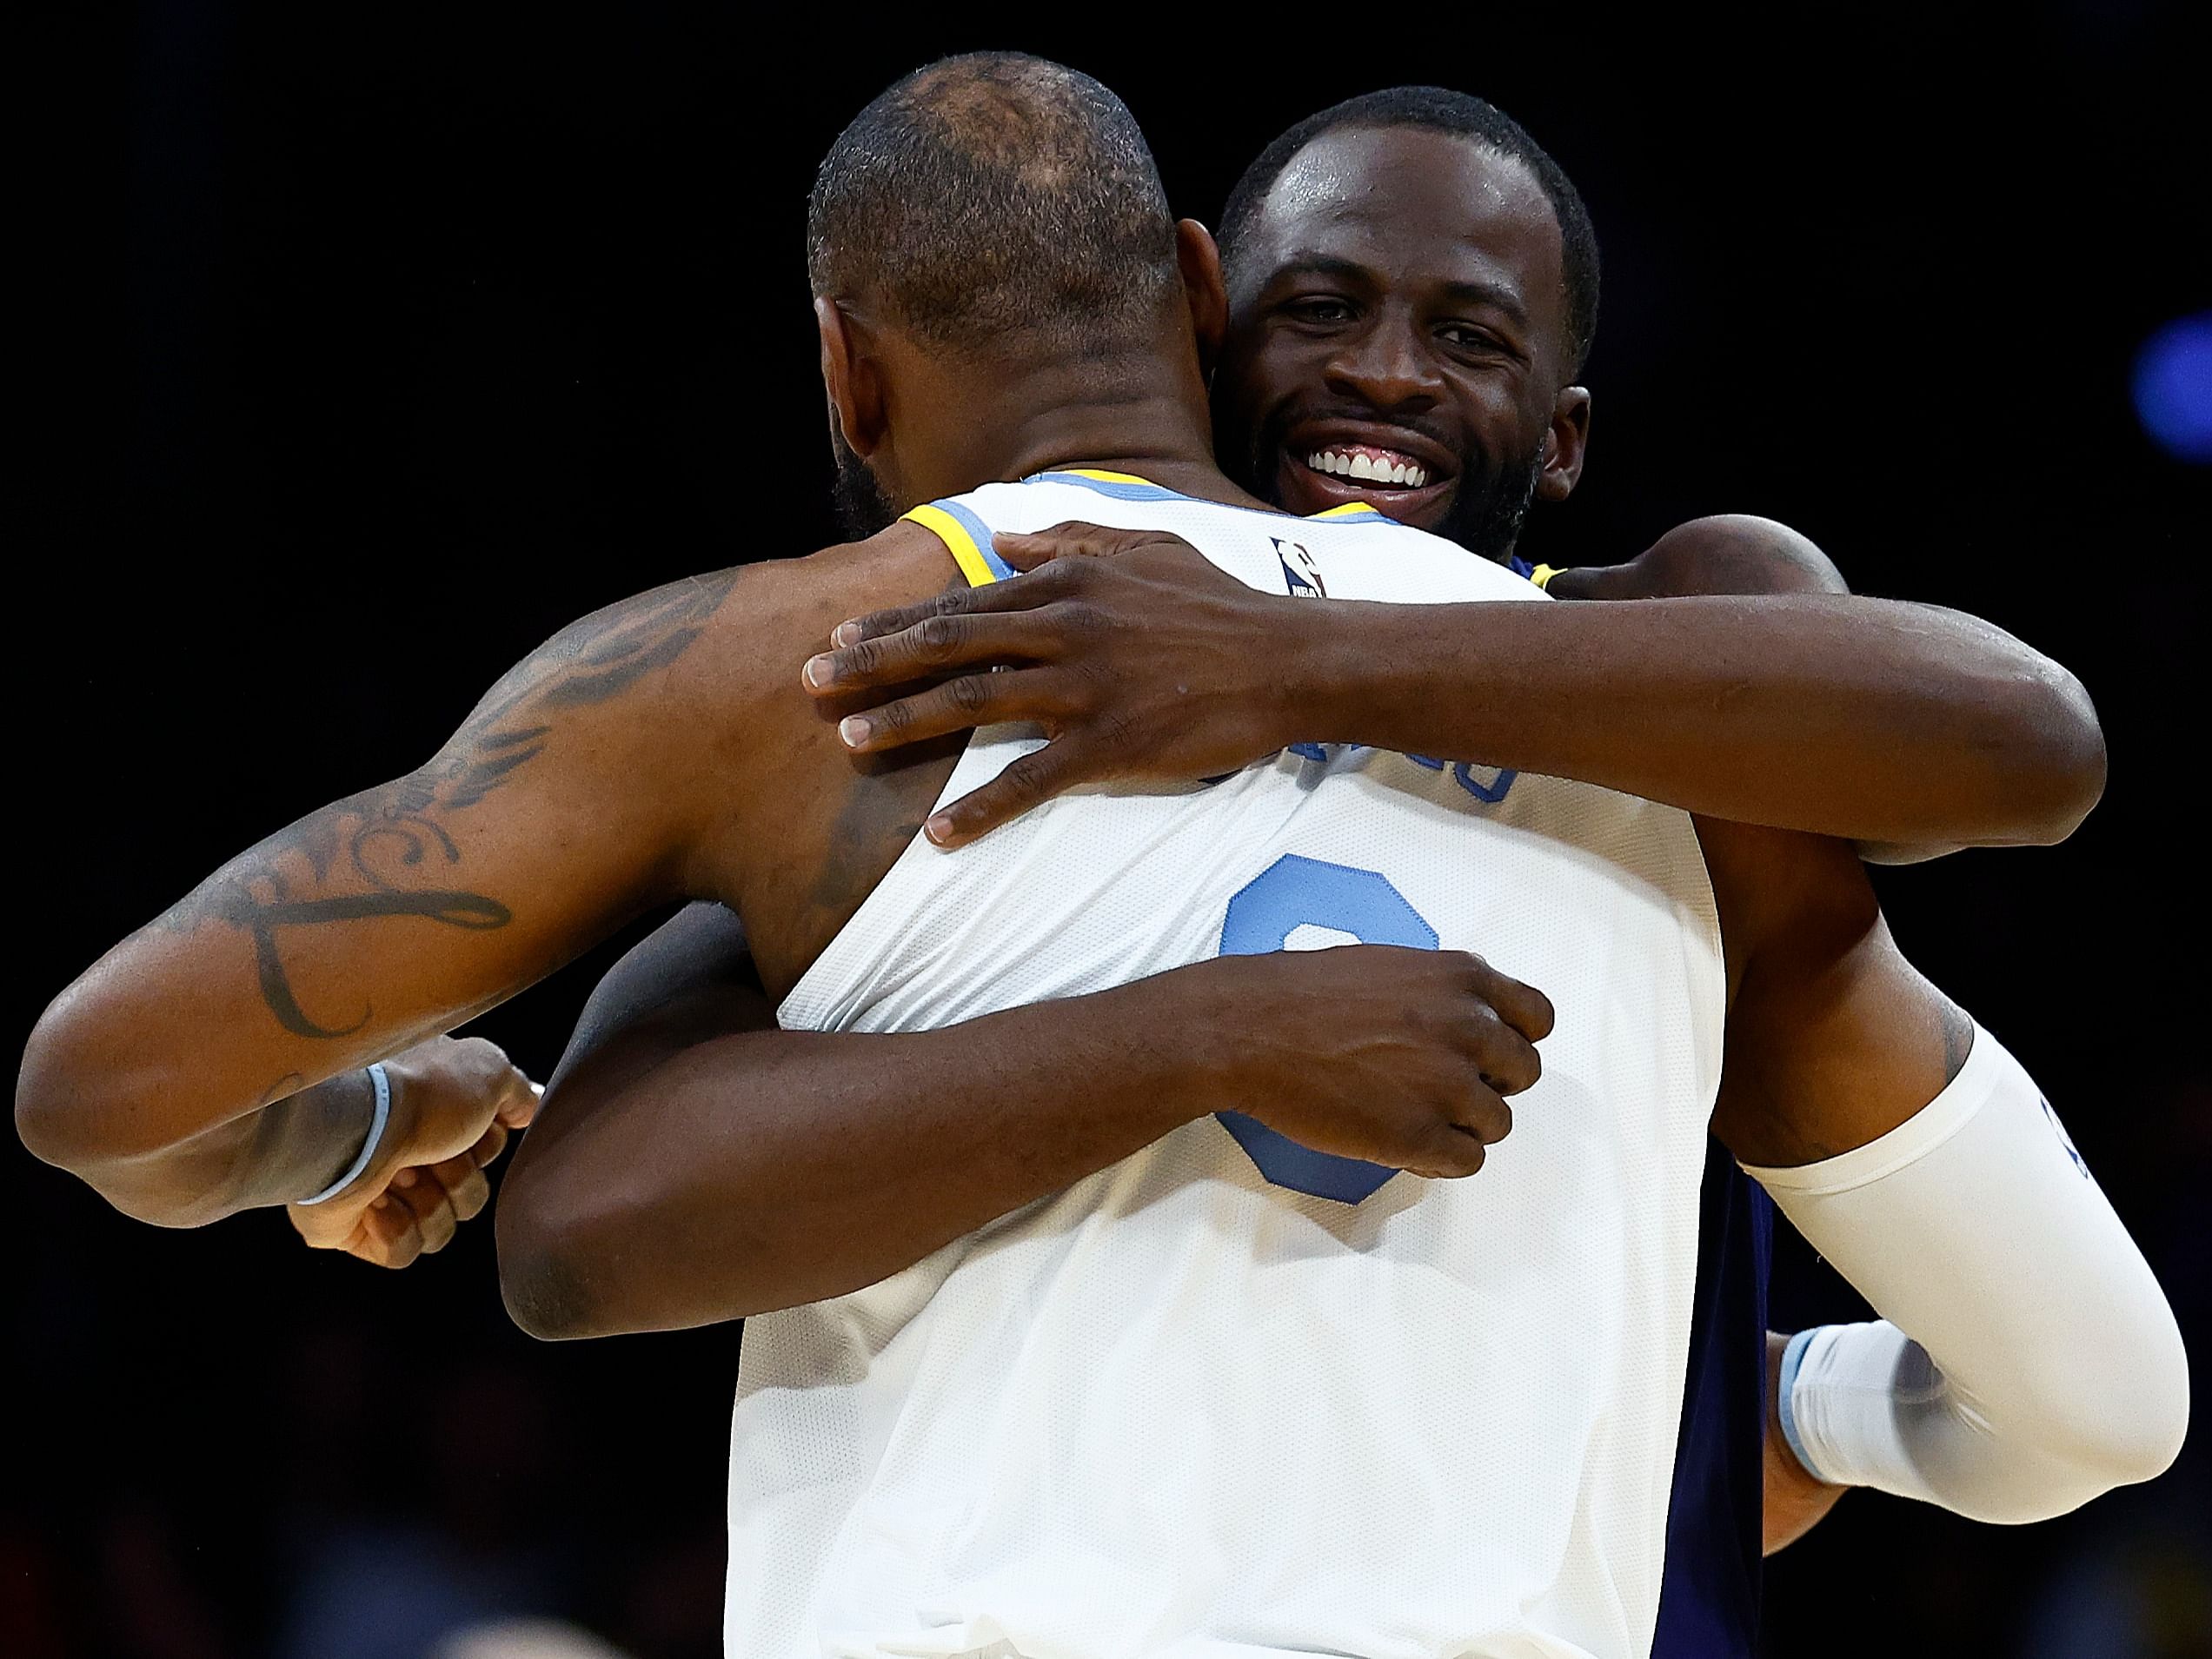 LeBron James of the LA Lakers and Draymond Green of the Golden State Warriors